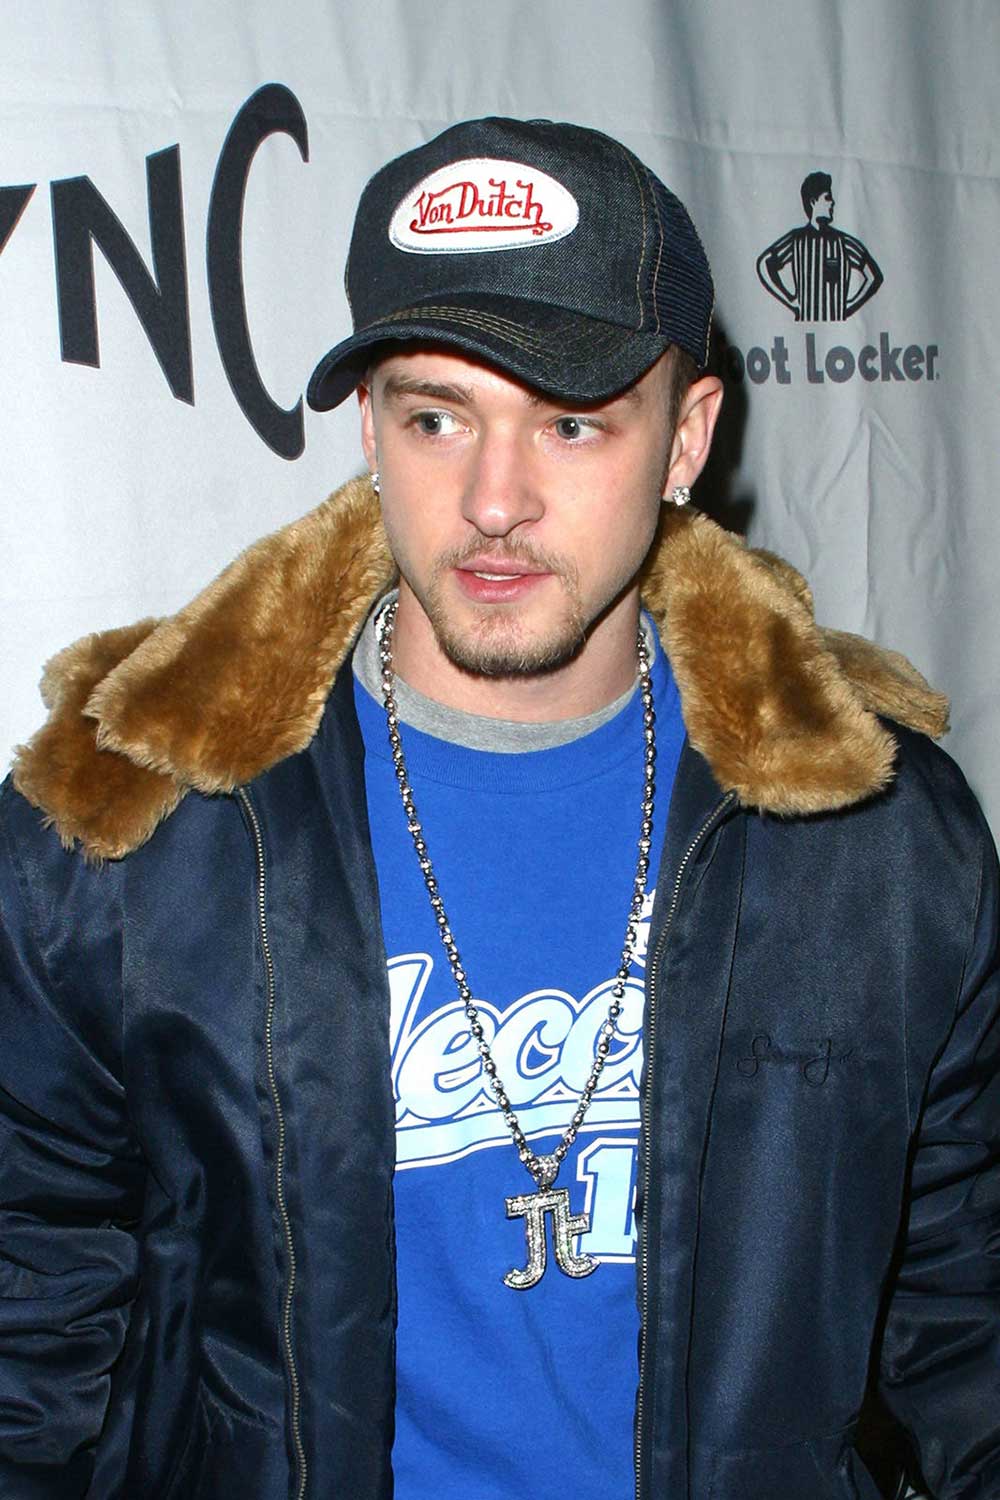 Justin Timberlake wearing a Von Dutch hat, a style that dates you to the 2000s